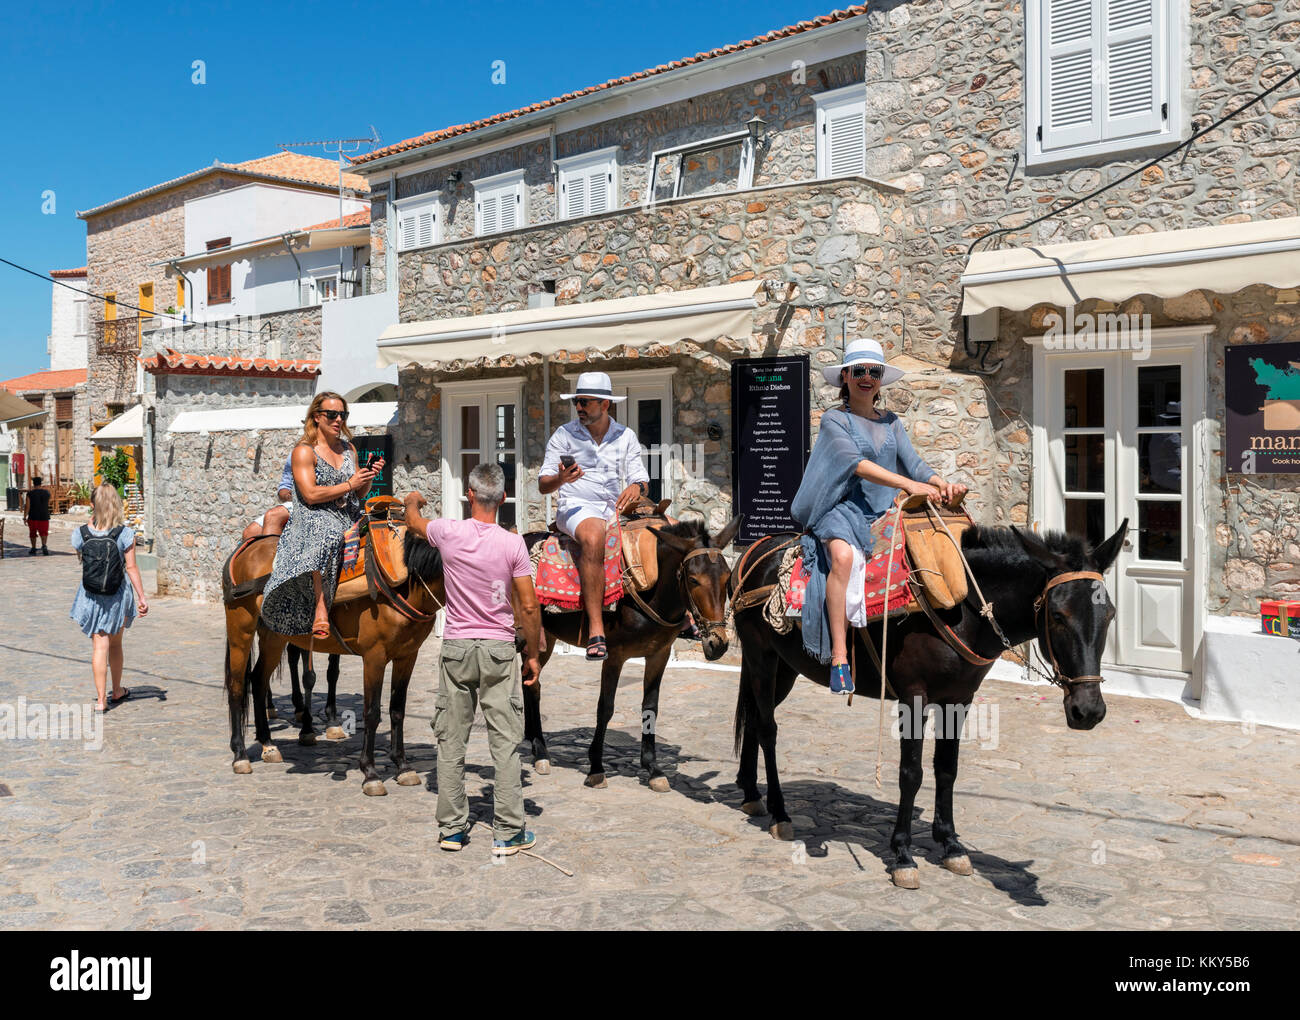 Tourists taking a donkey ride through the streets of Hydra town, Hydra, Saronic Islands, Greece Stock Photo